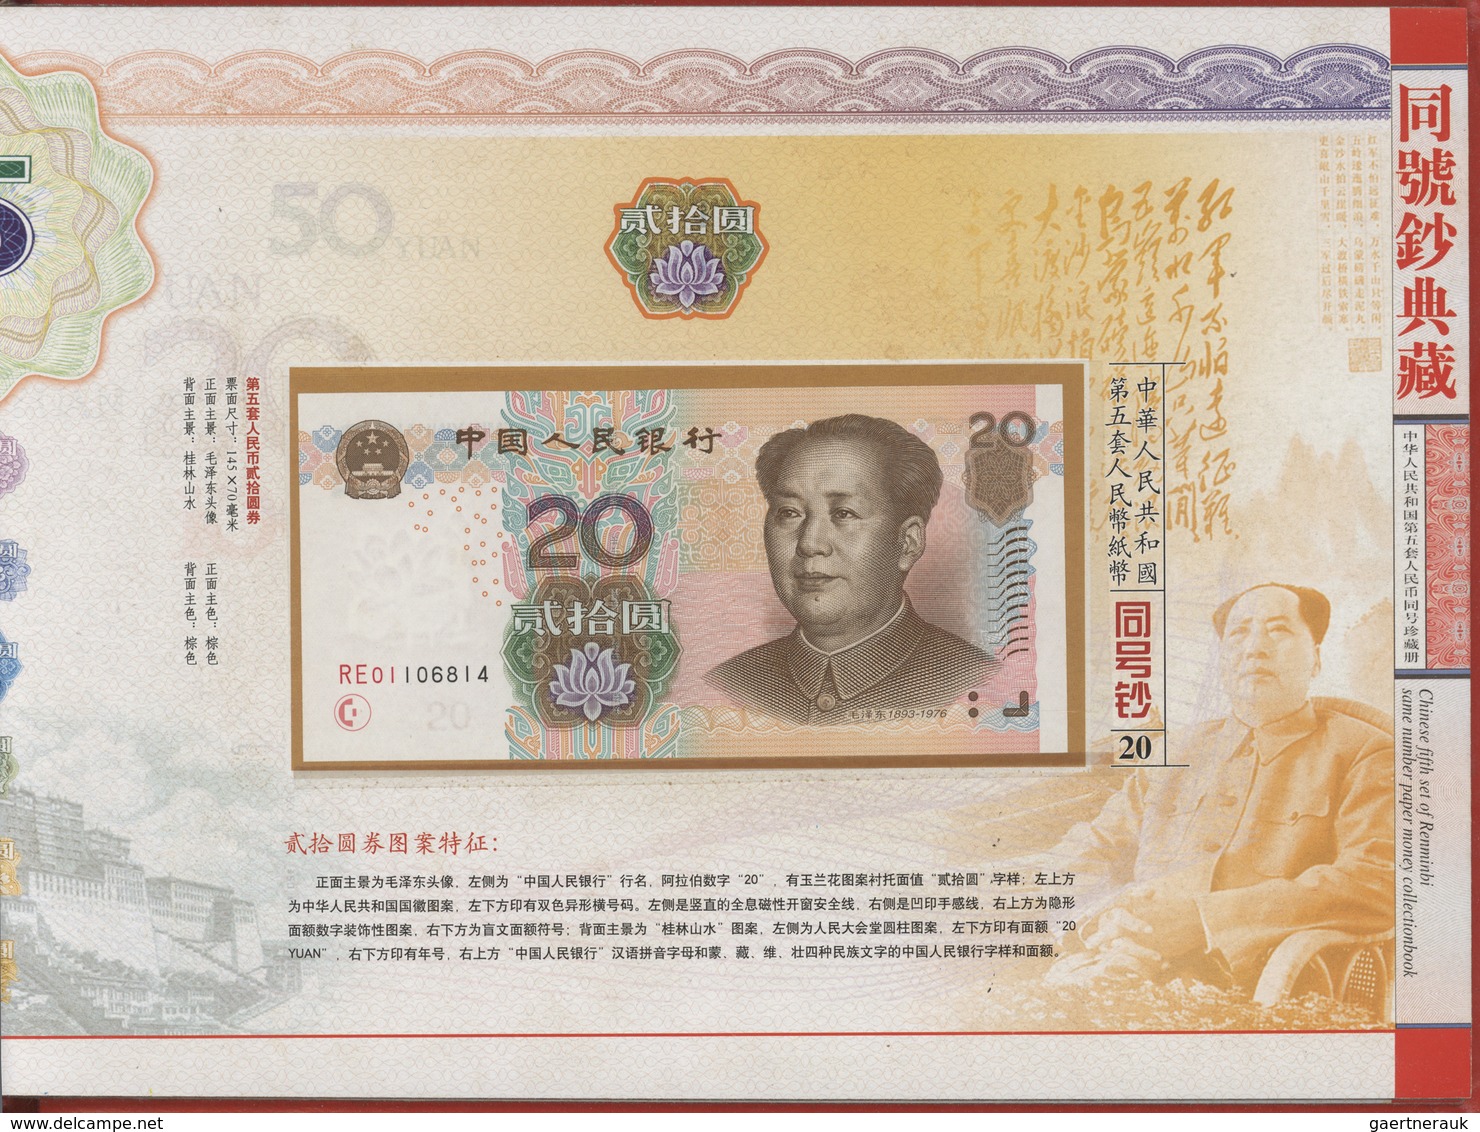 China: Collectors album issued by the Peoples Bank of China with new issued fith set of the RMB from